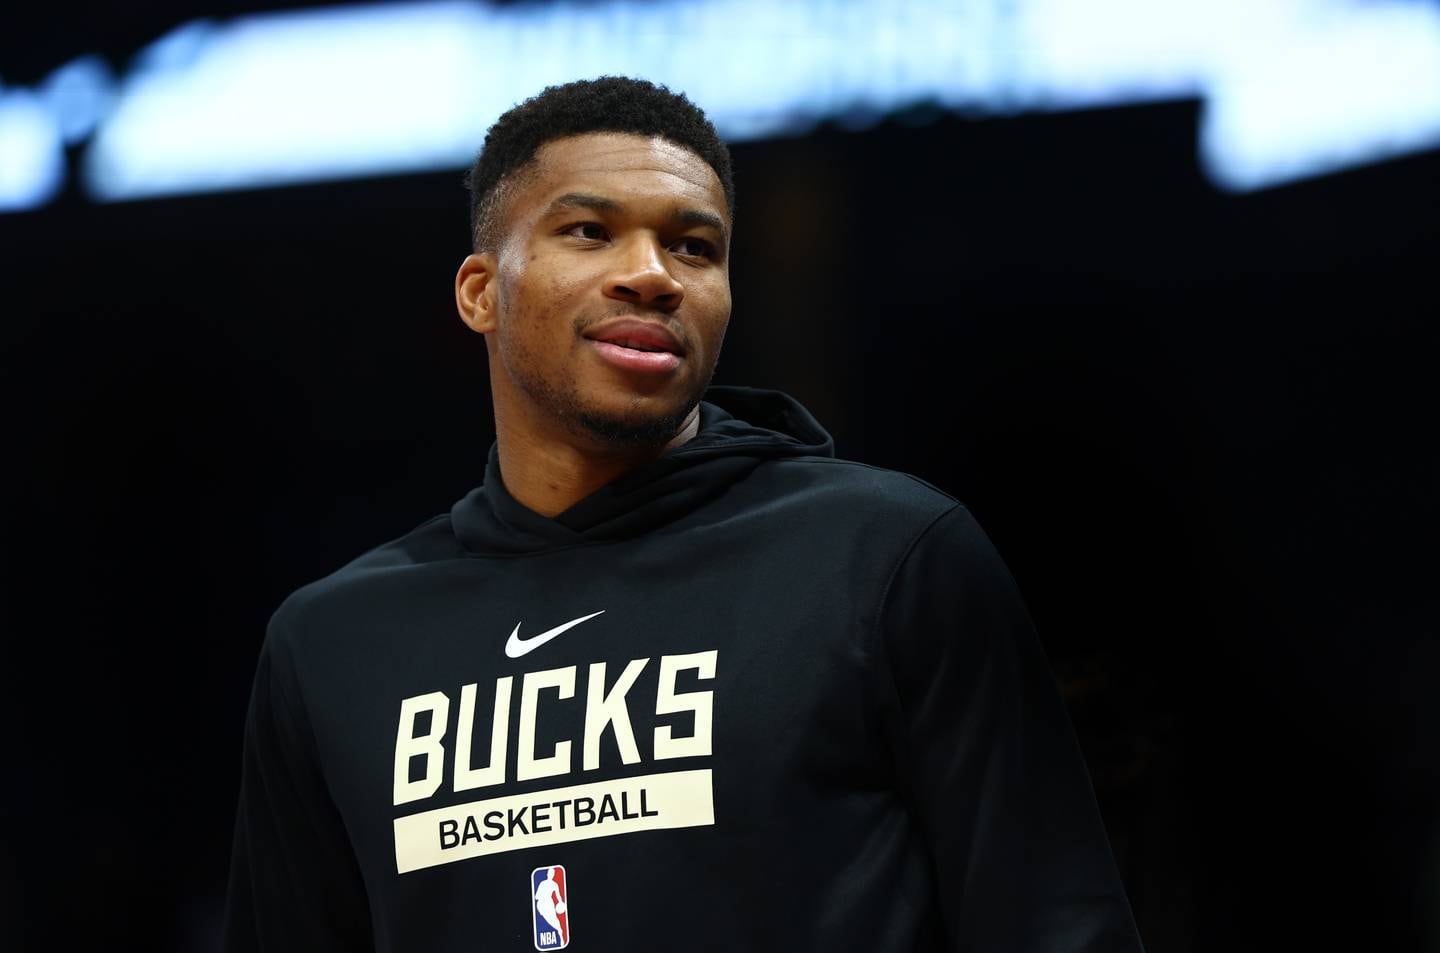 Giannis Antetokounmpo did not play for the Milwaukee Bucks in Game 2 of the NBA Abu Dhabi Games series against the Atlanta Hawks.Getty Images